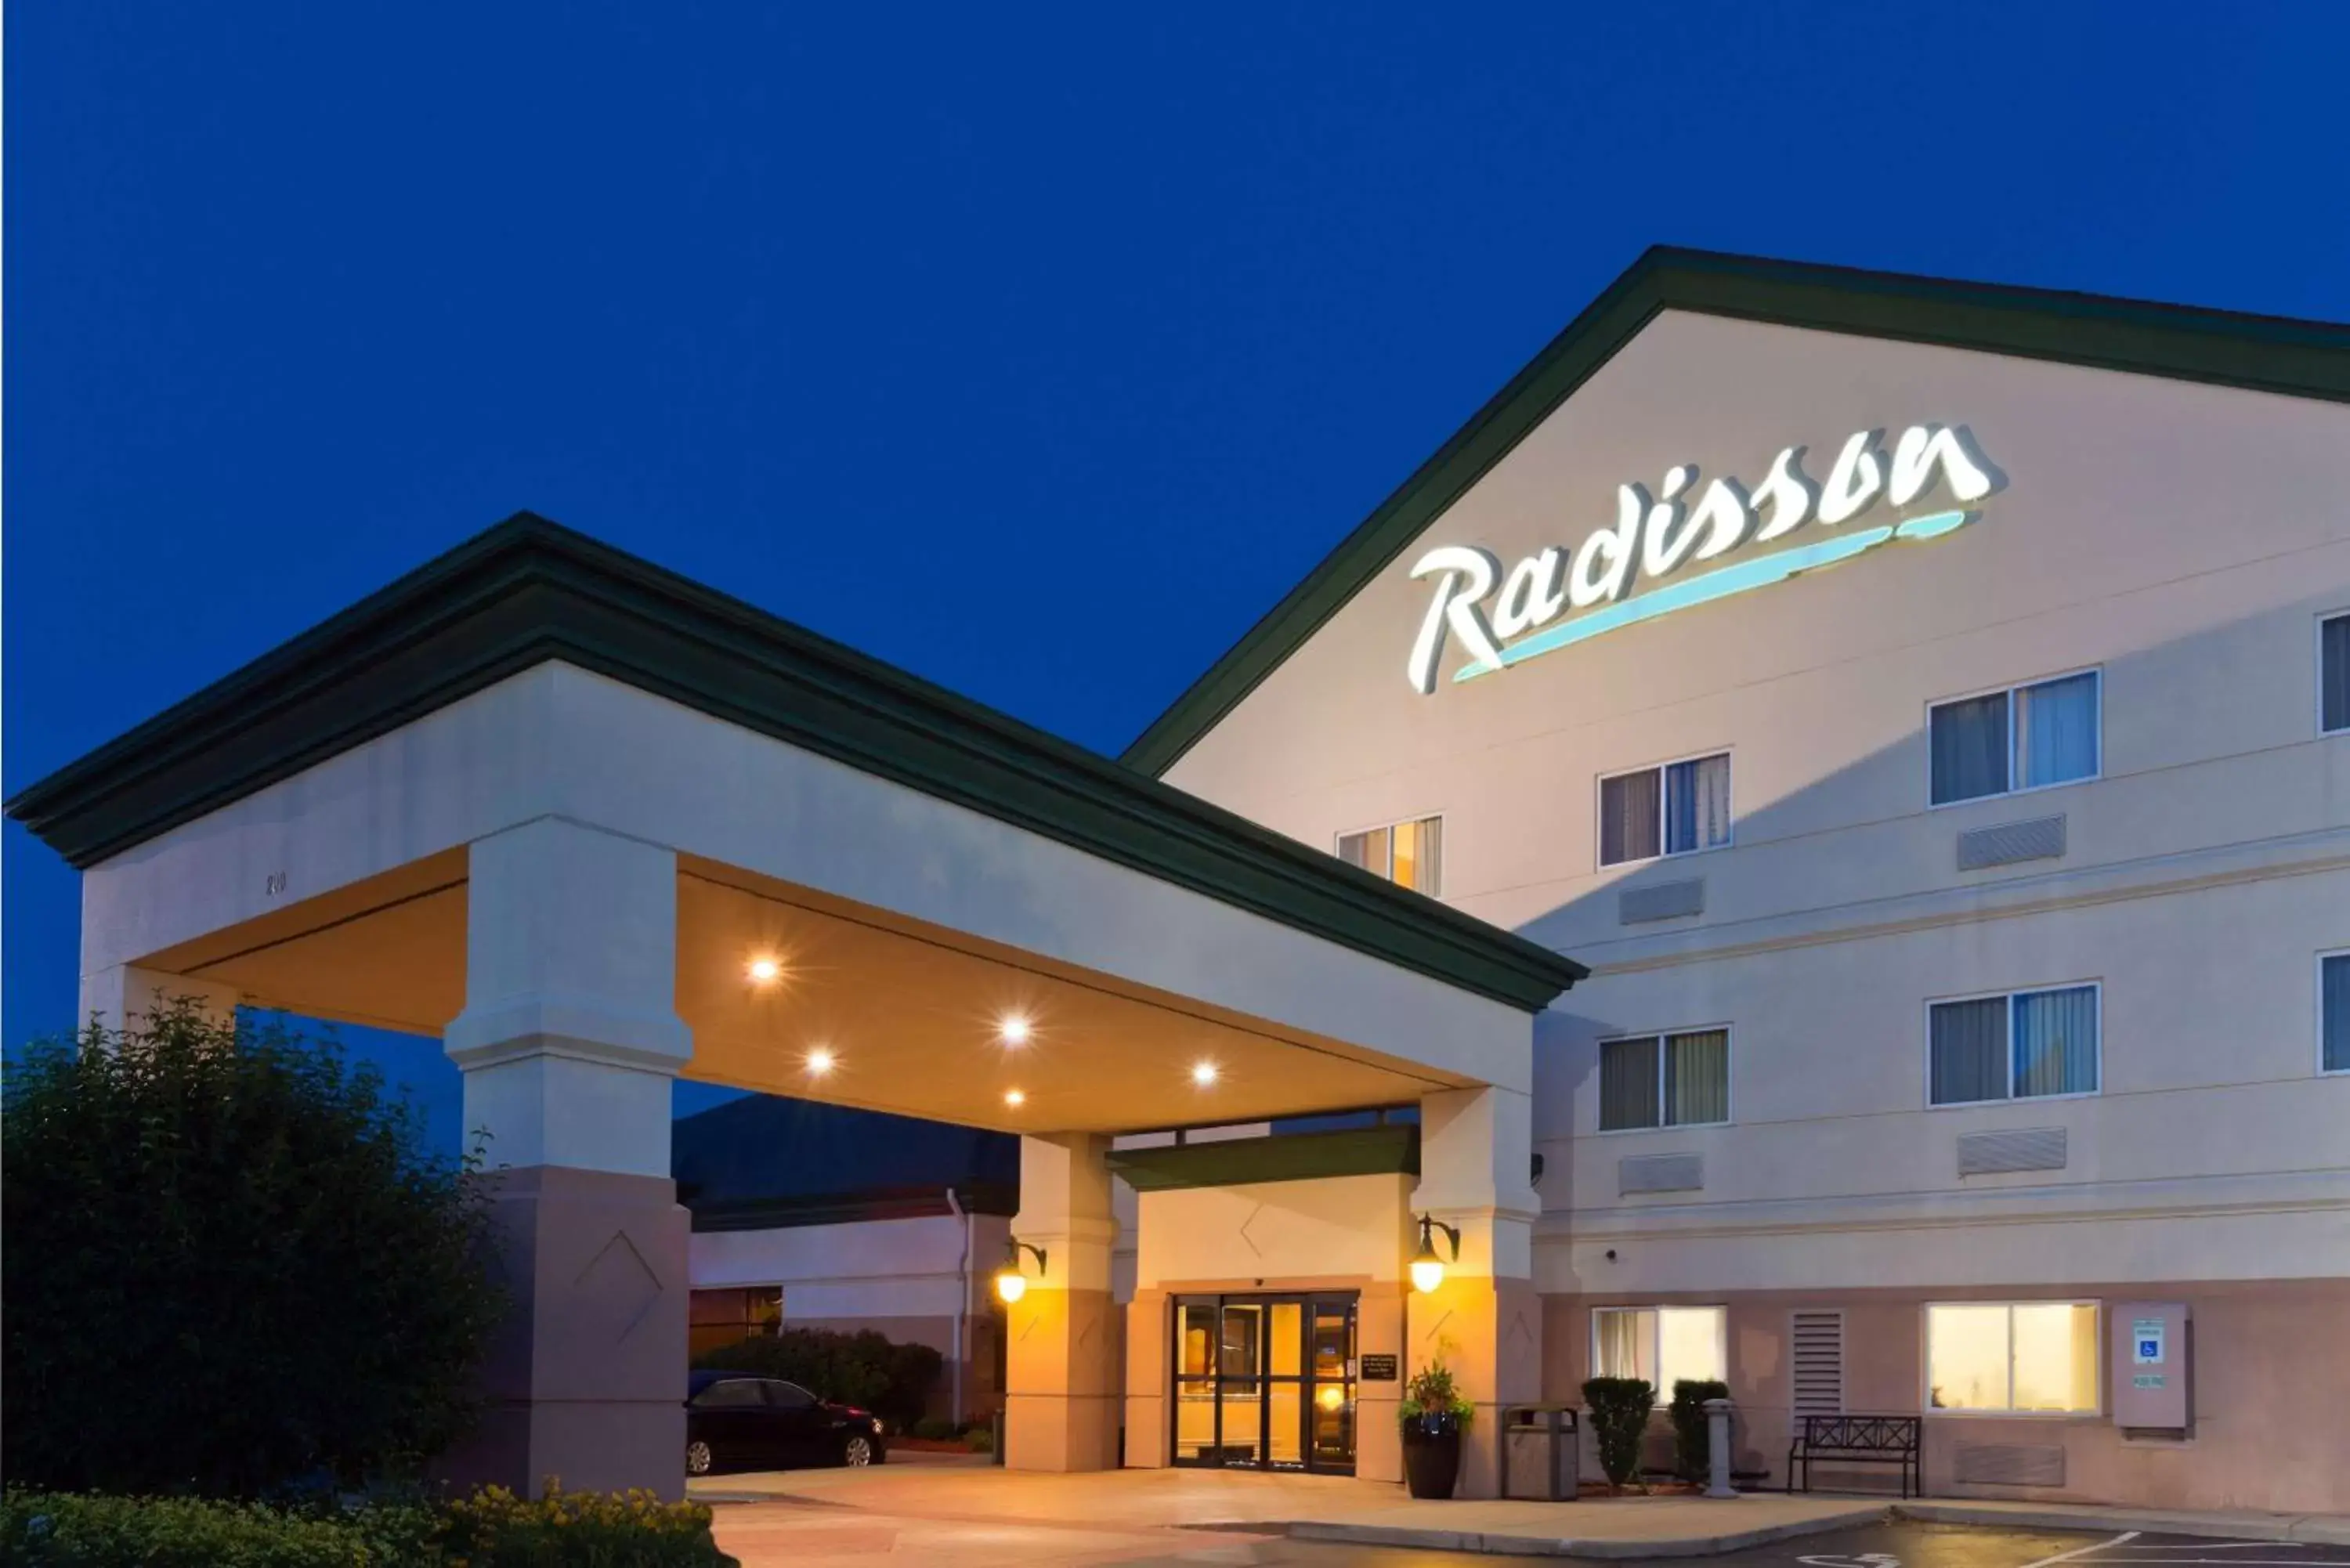 Property building in Radisson Hotel & Conference Center Rockford